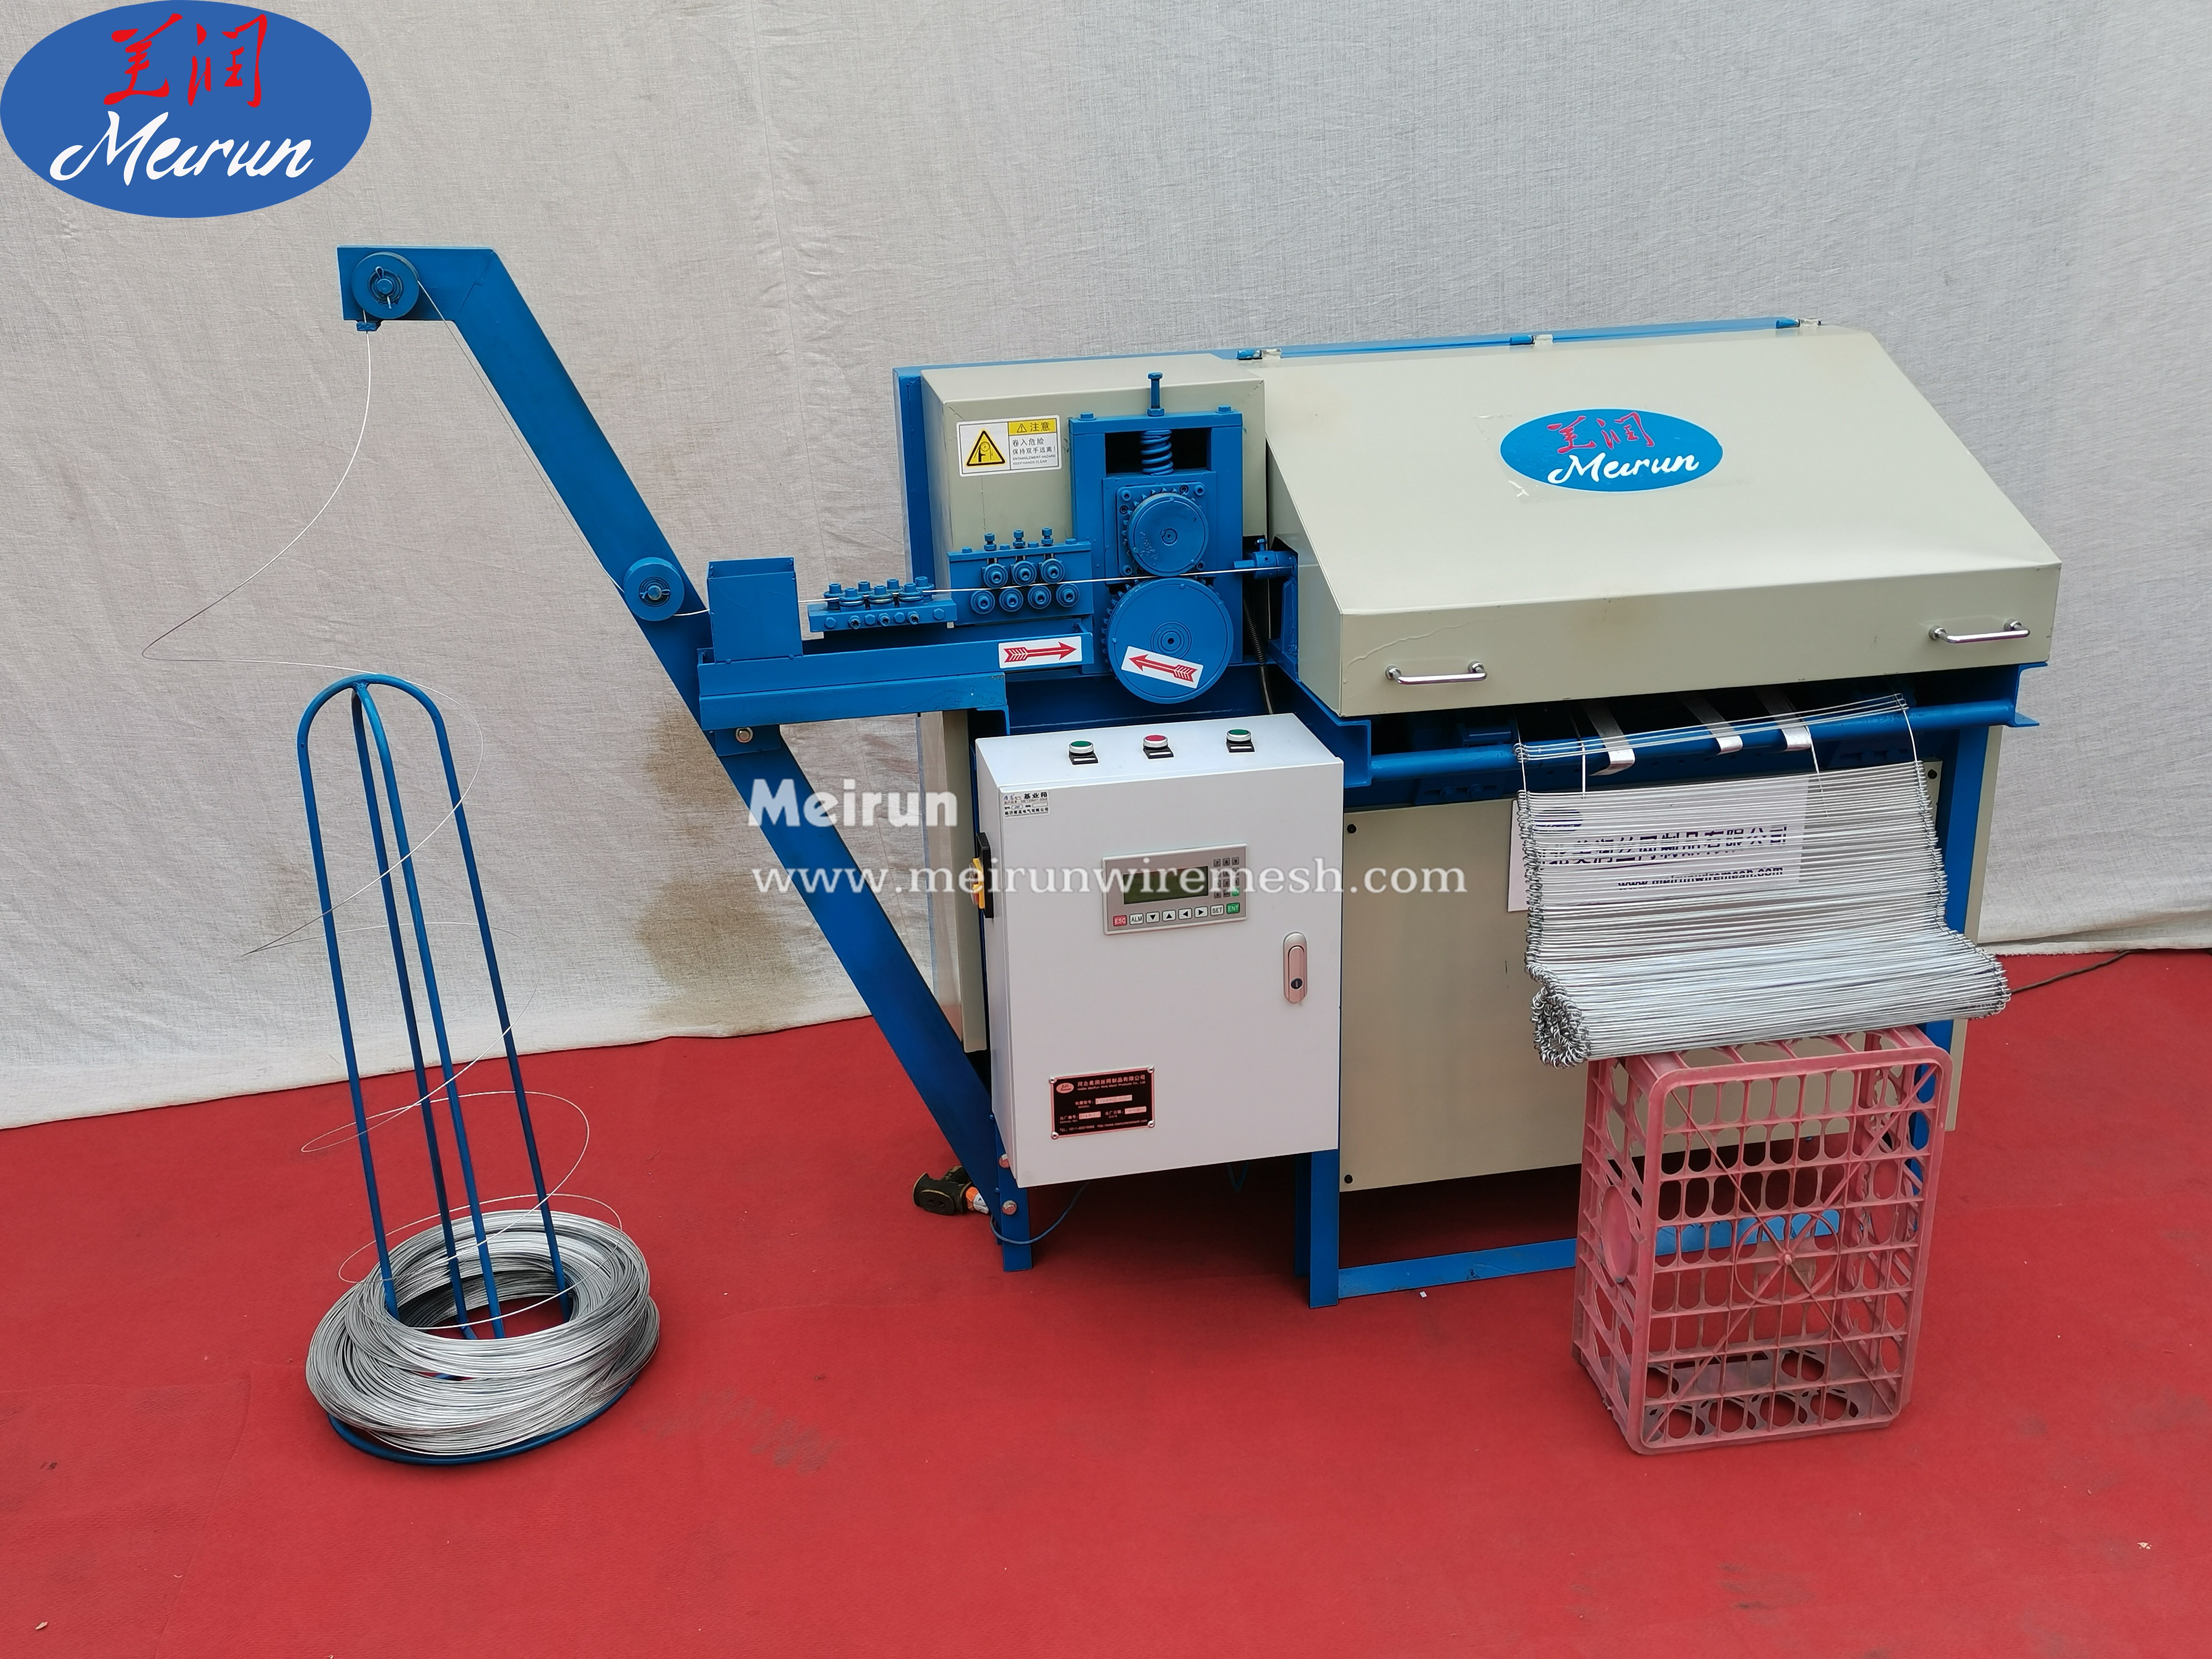 Double Looped Wire Ties Machine, For Construction, Tying of Steel Bars